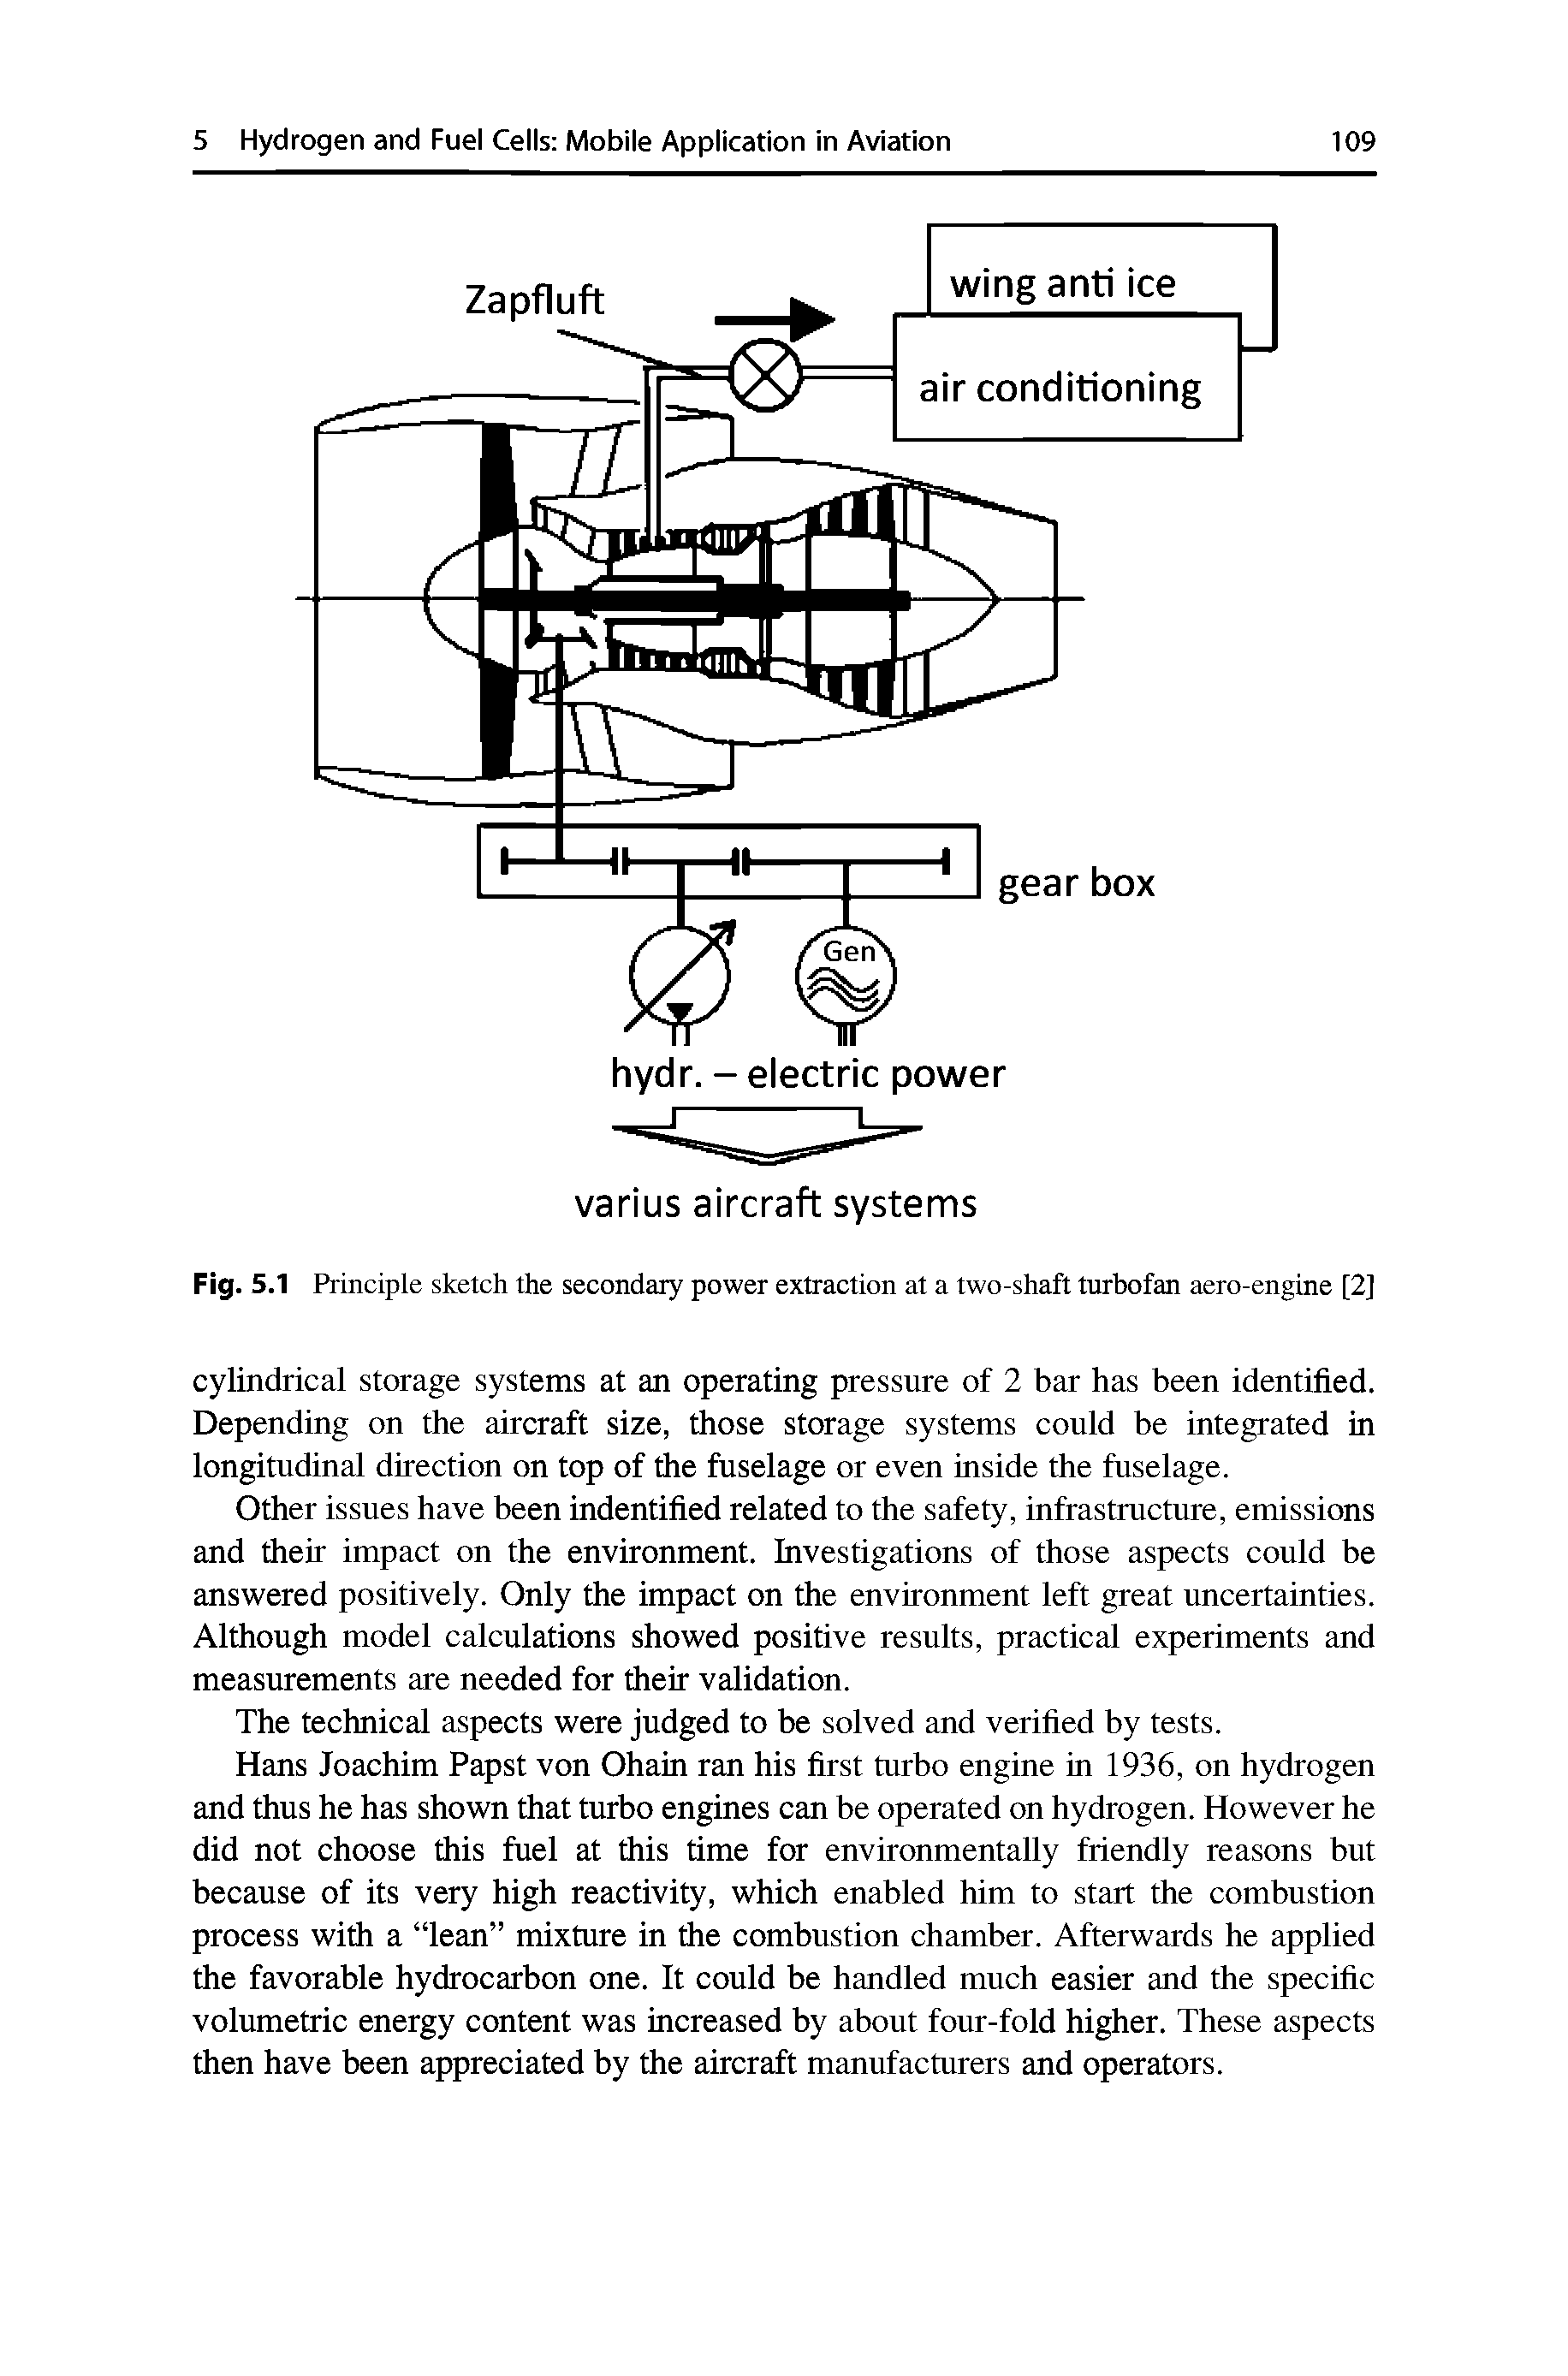 Fig. 5.1 Principle sketch the secondary power extraction at a two-shaft turbofan aero-engine [2]...